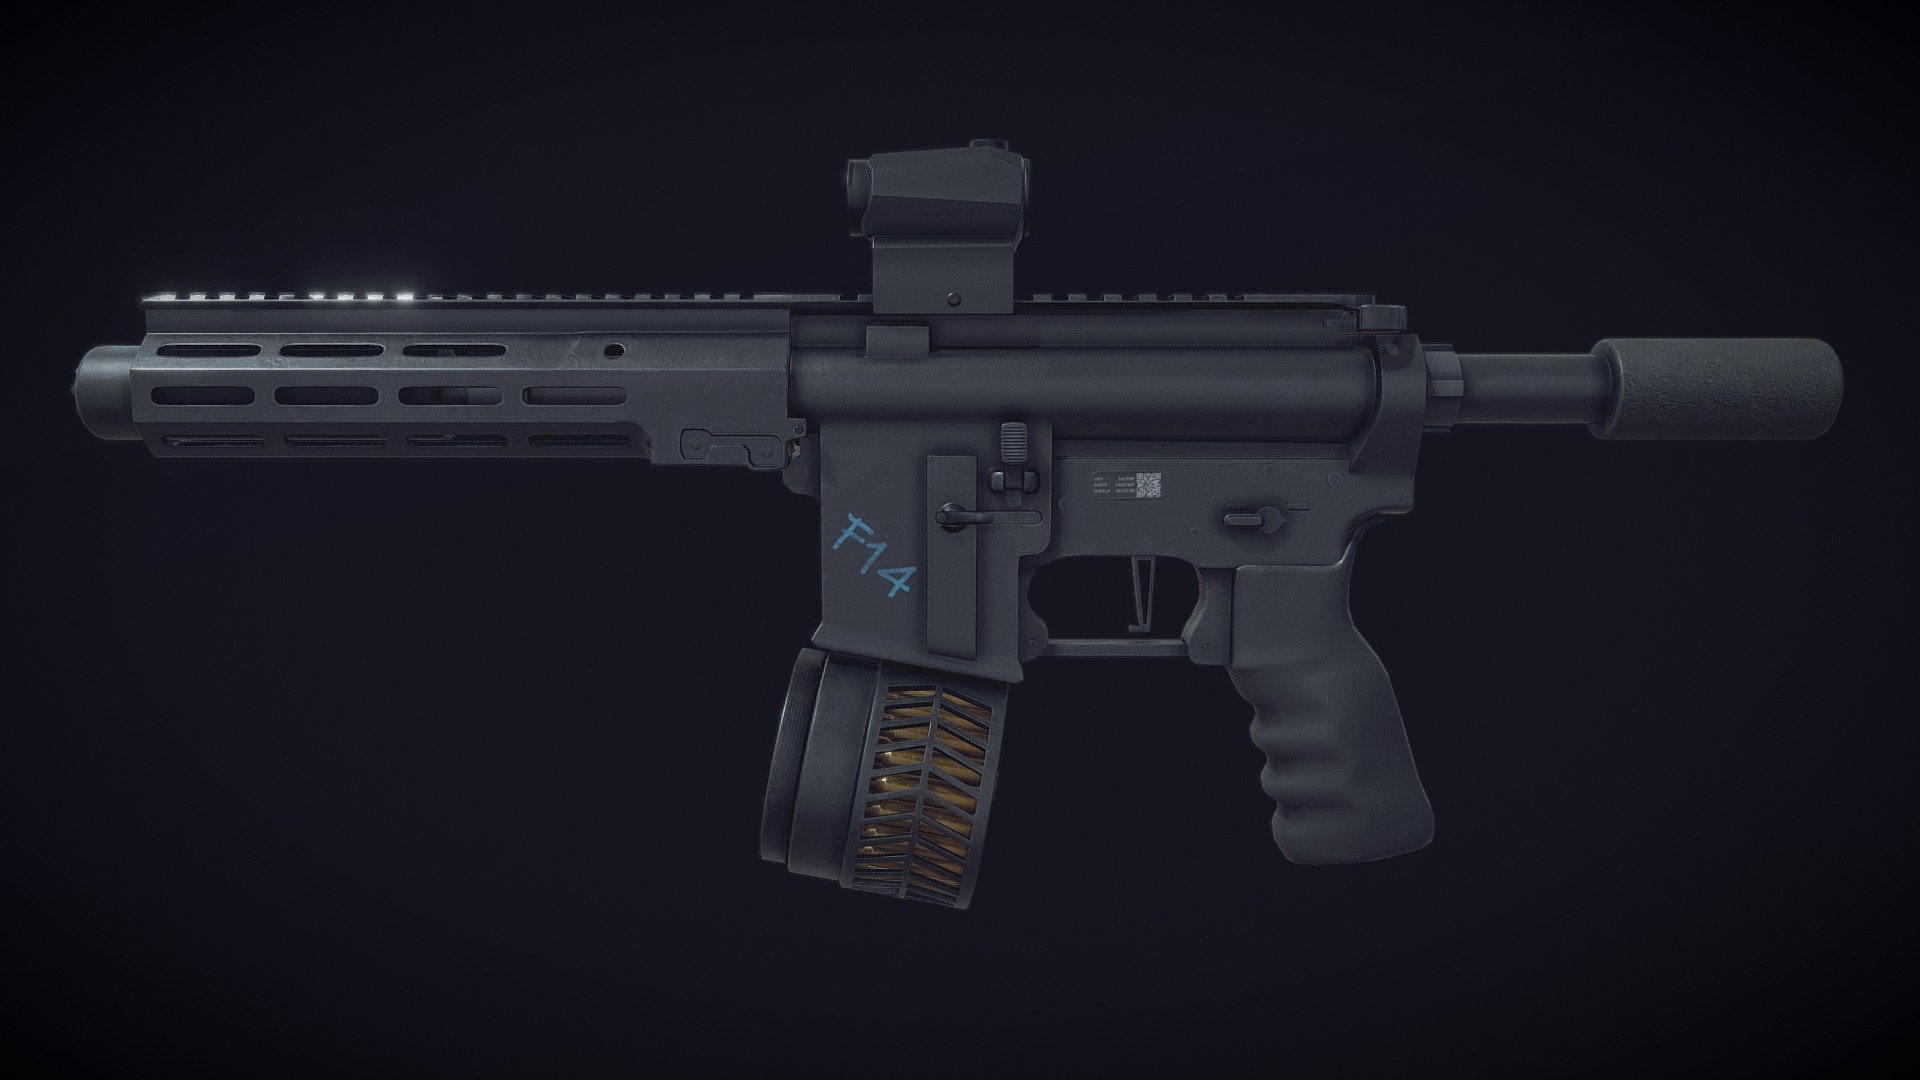 AR-15 Style Rifle in compact version with tactical atatchments such as suppressor, red dot sight, drum magazine, pistol grip.

This model is derivative of M4A1-S DESERT CUSTOM by Jordan Whincup CC Attribution-NonCommercial-NoDerivs and shared with permission of the author under the condition that in any case of future use of this asset the link to his original model will be in credits as well 3d model